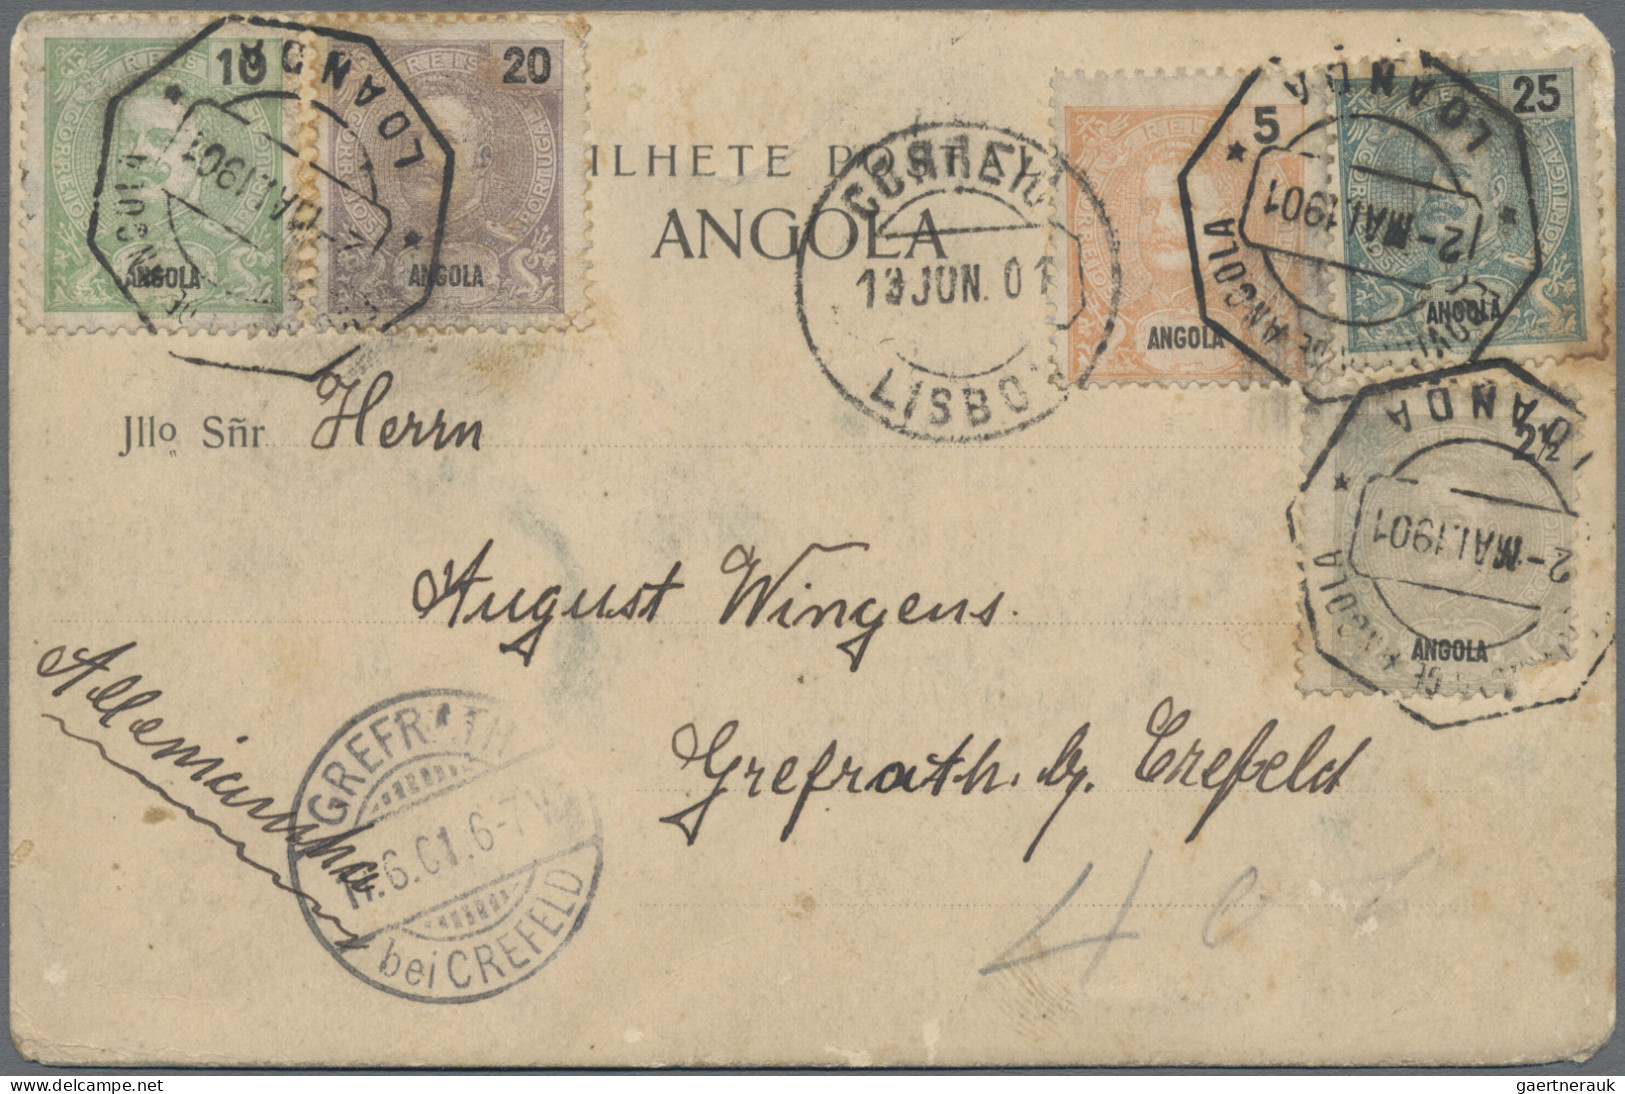 Angola: 1900/2005 (ca.), balance of apprx. 800-1.000 covers/cards incl. ppc, als